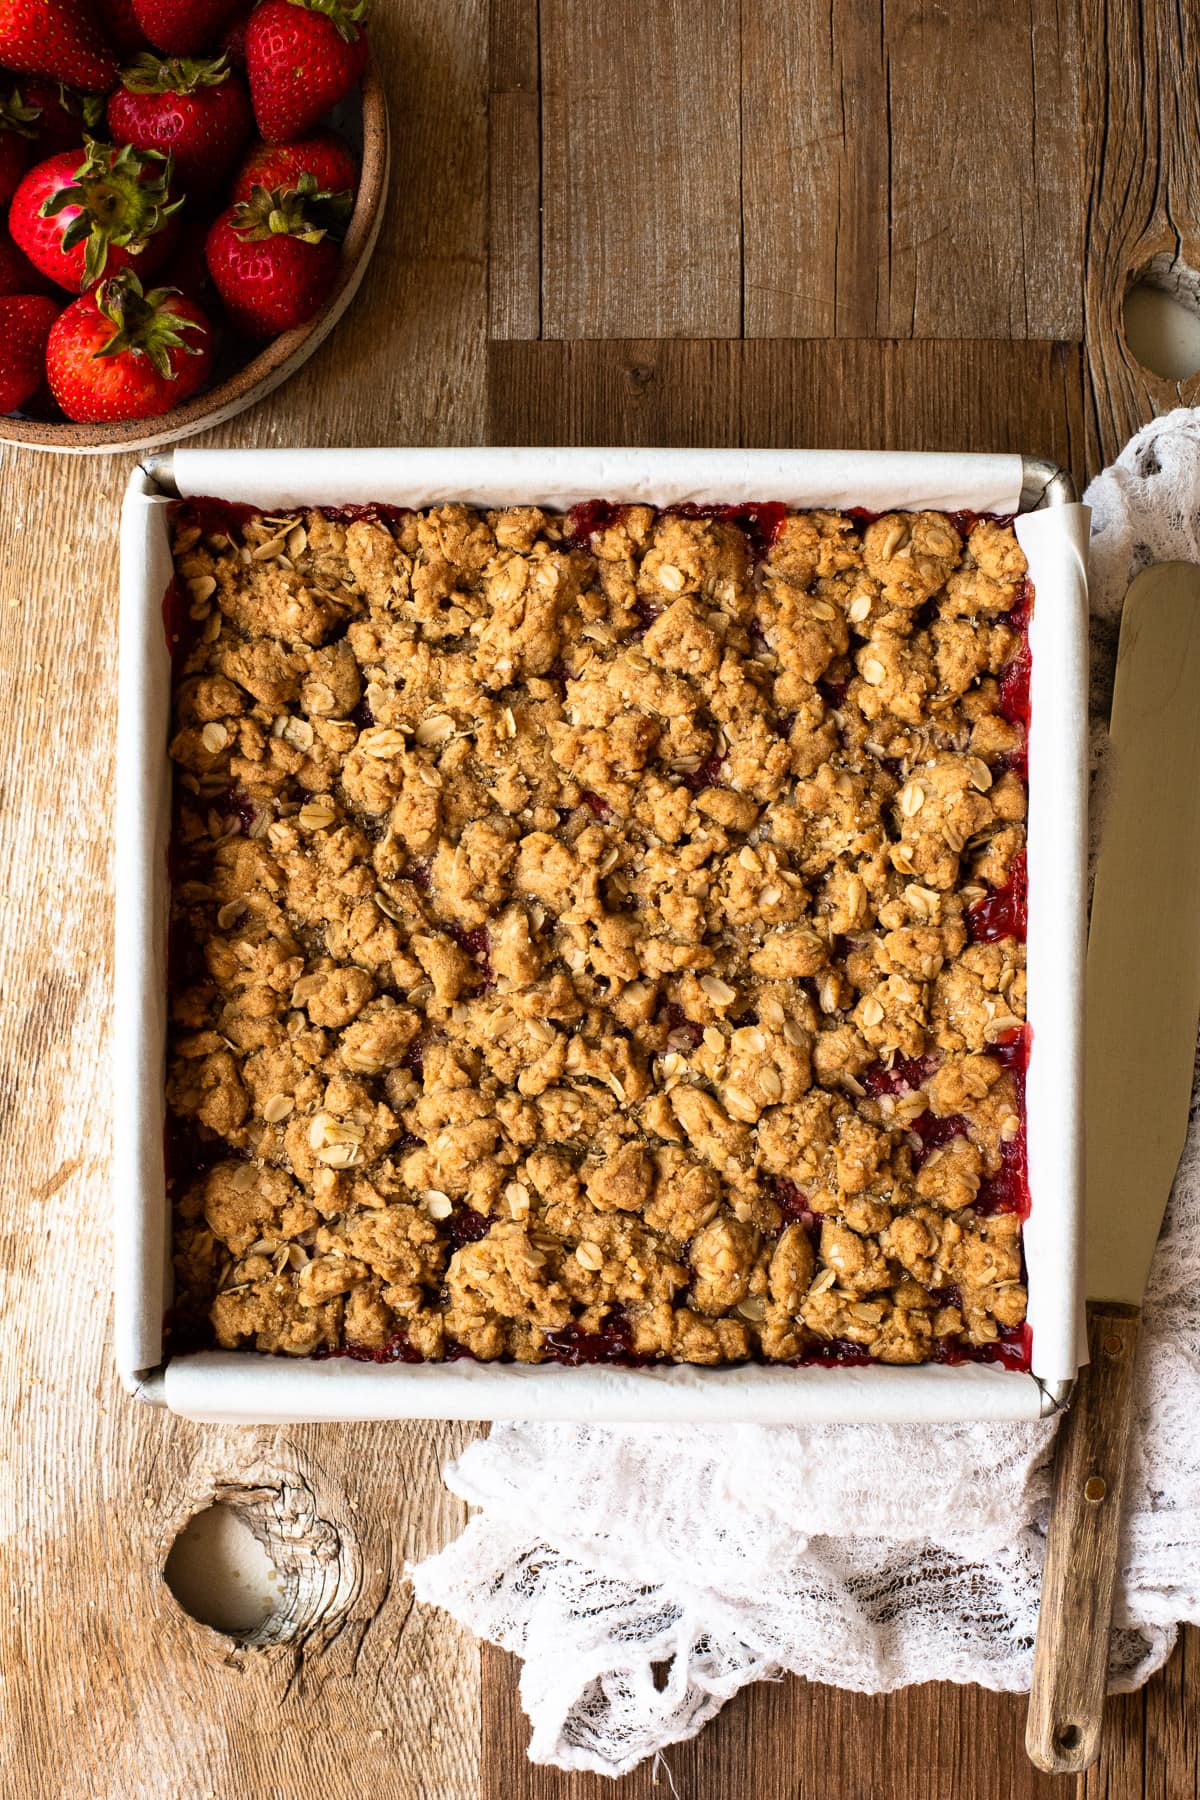 Strawberry crumb bars cooling in a parchment-lined pan.